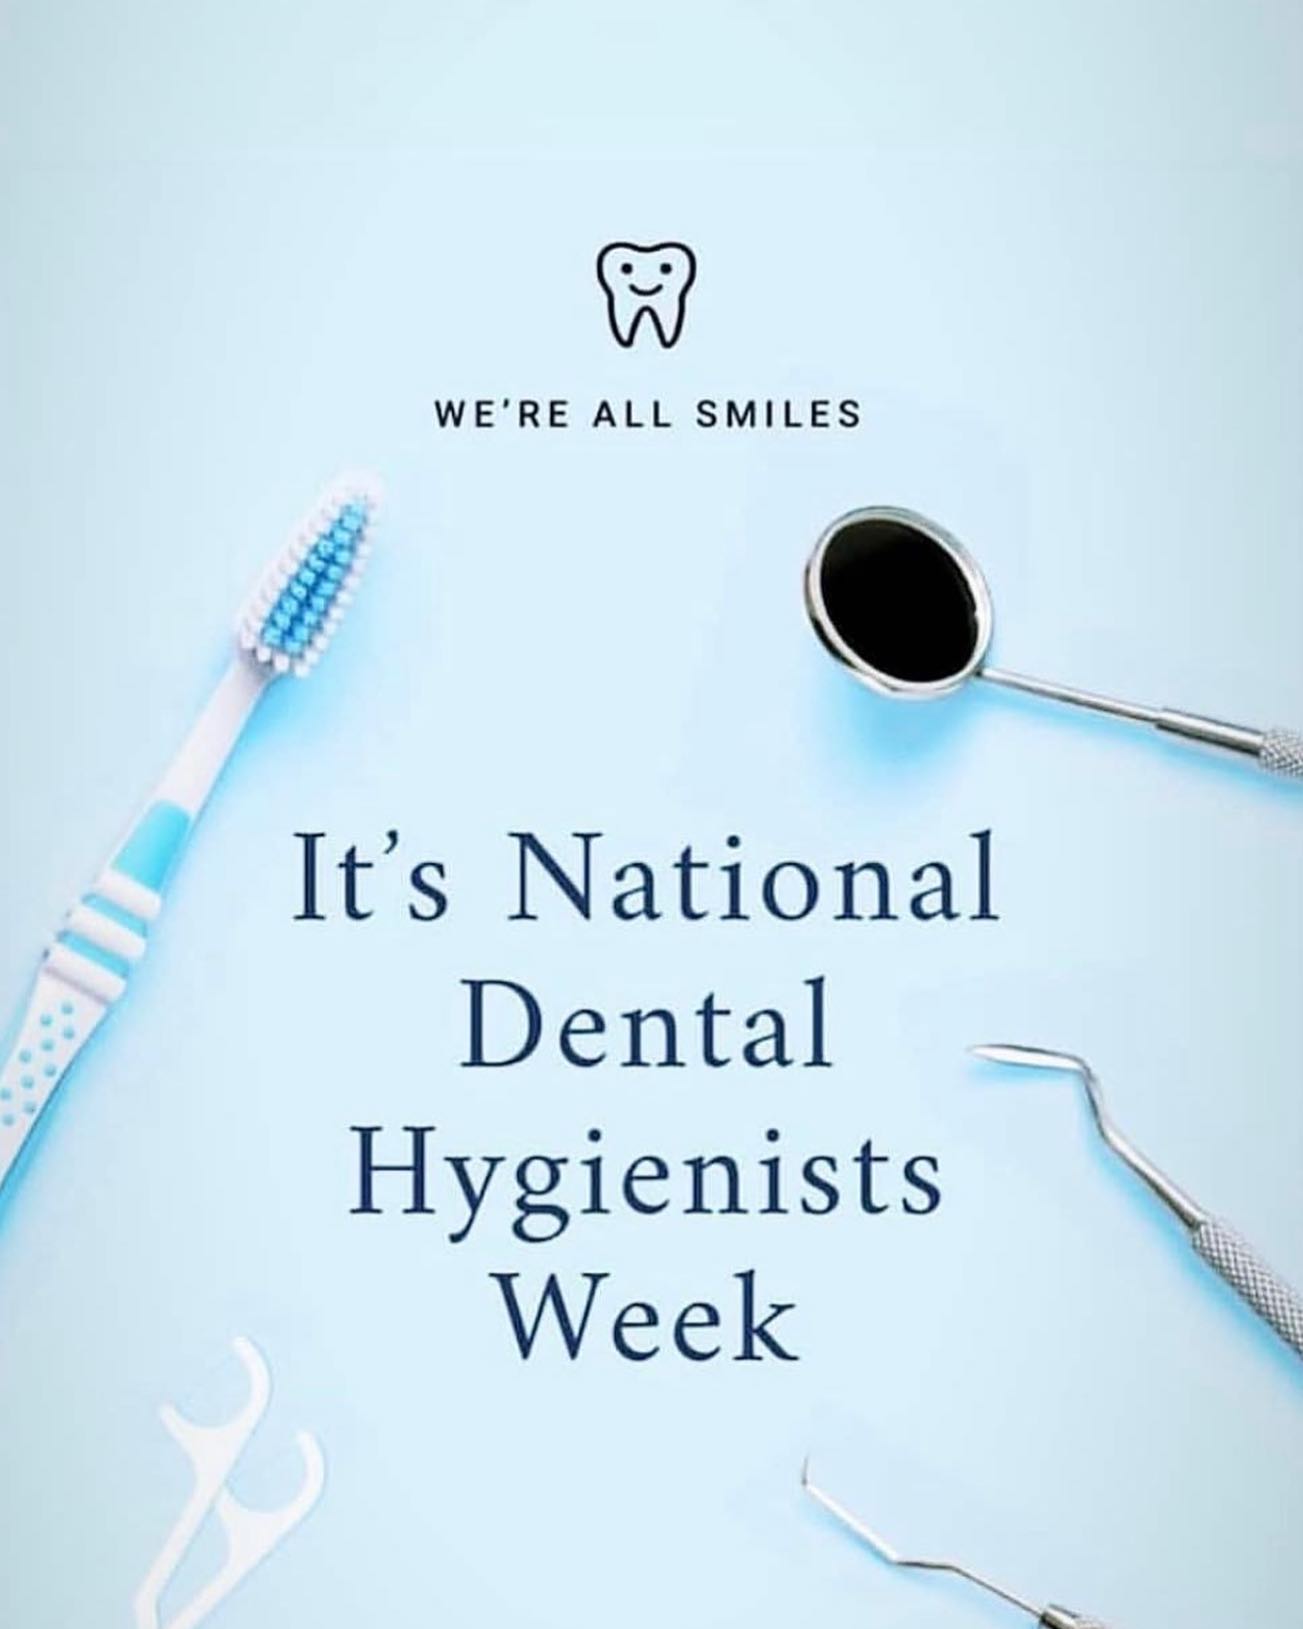 A huge thank you to our hygienists for always bringing the shine ✨ We appreciate everything you do 🦷 👏🏻 

.

.

.

.#dentalhygiene #appreciation #thankyou #dental #yyjdental #oakbay #oakbaylocal #victoriabc #beautifulbc